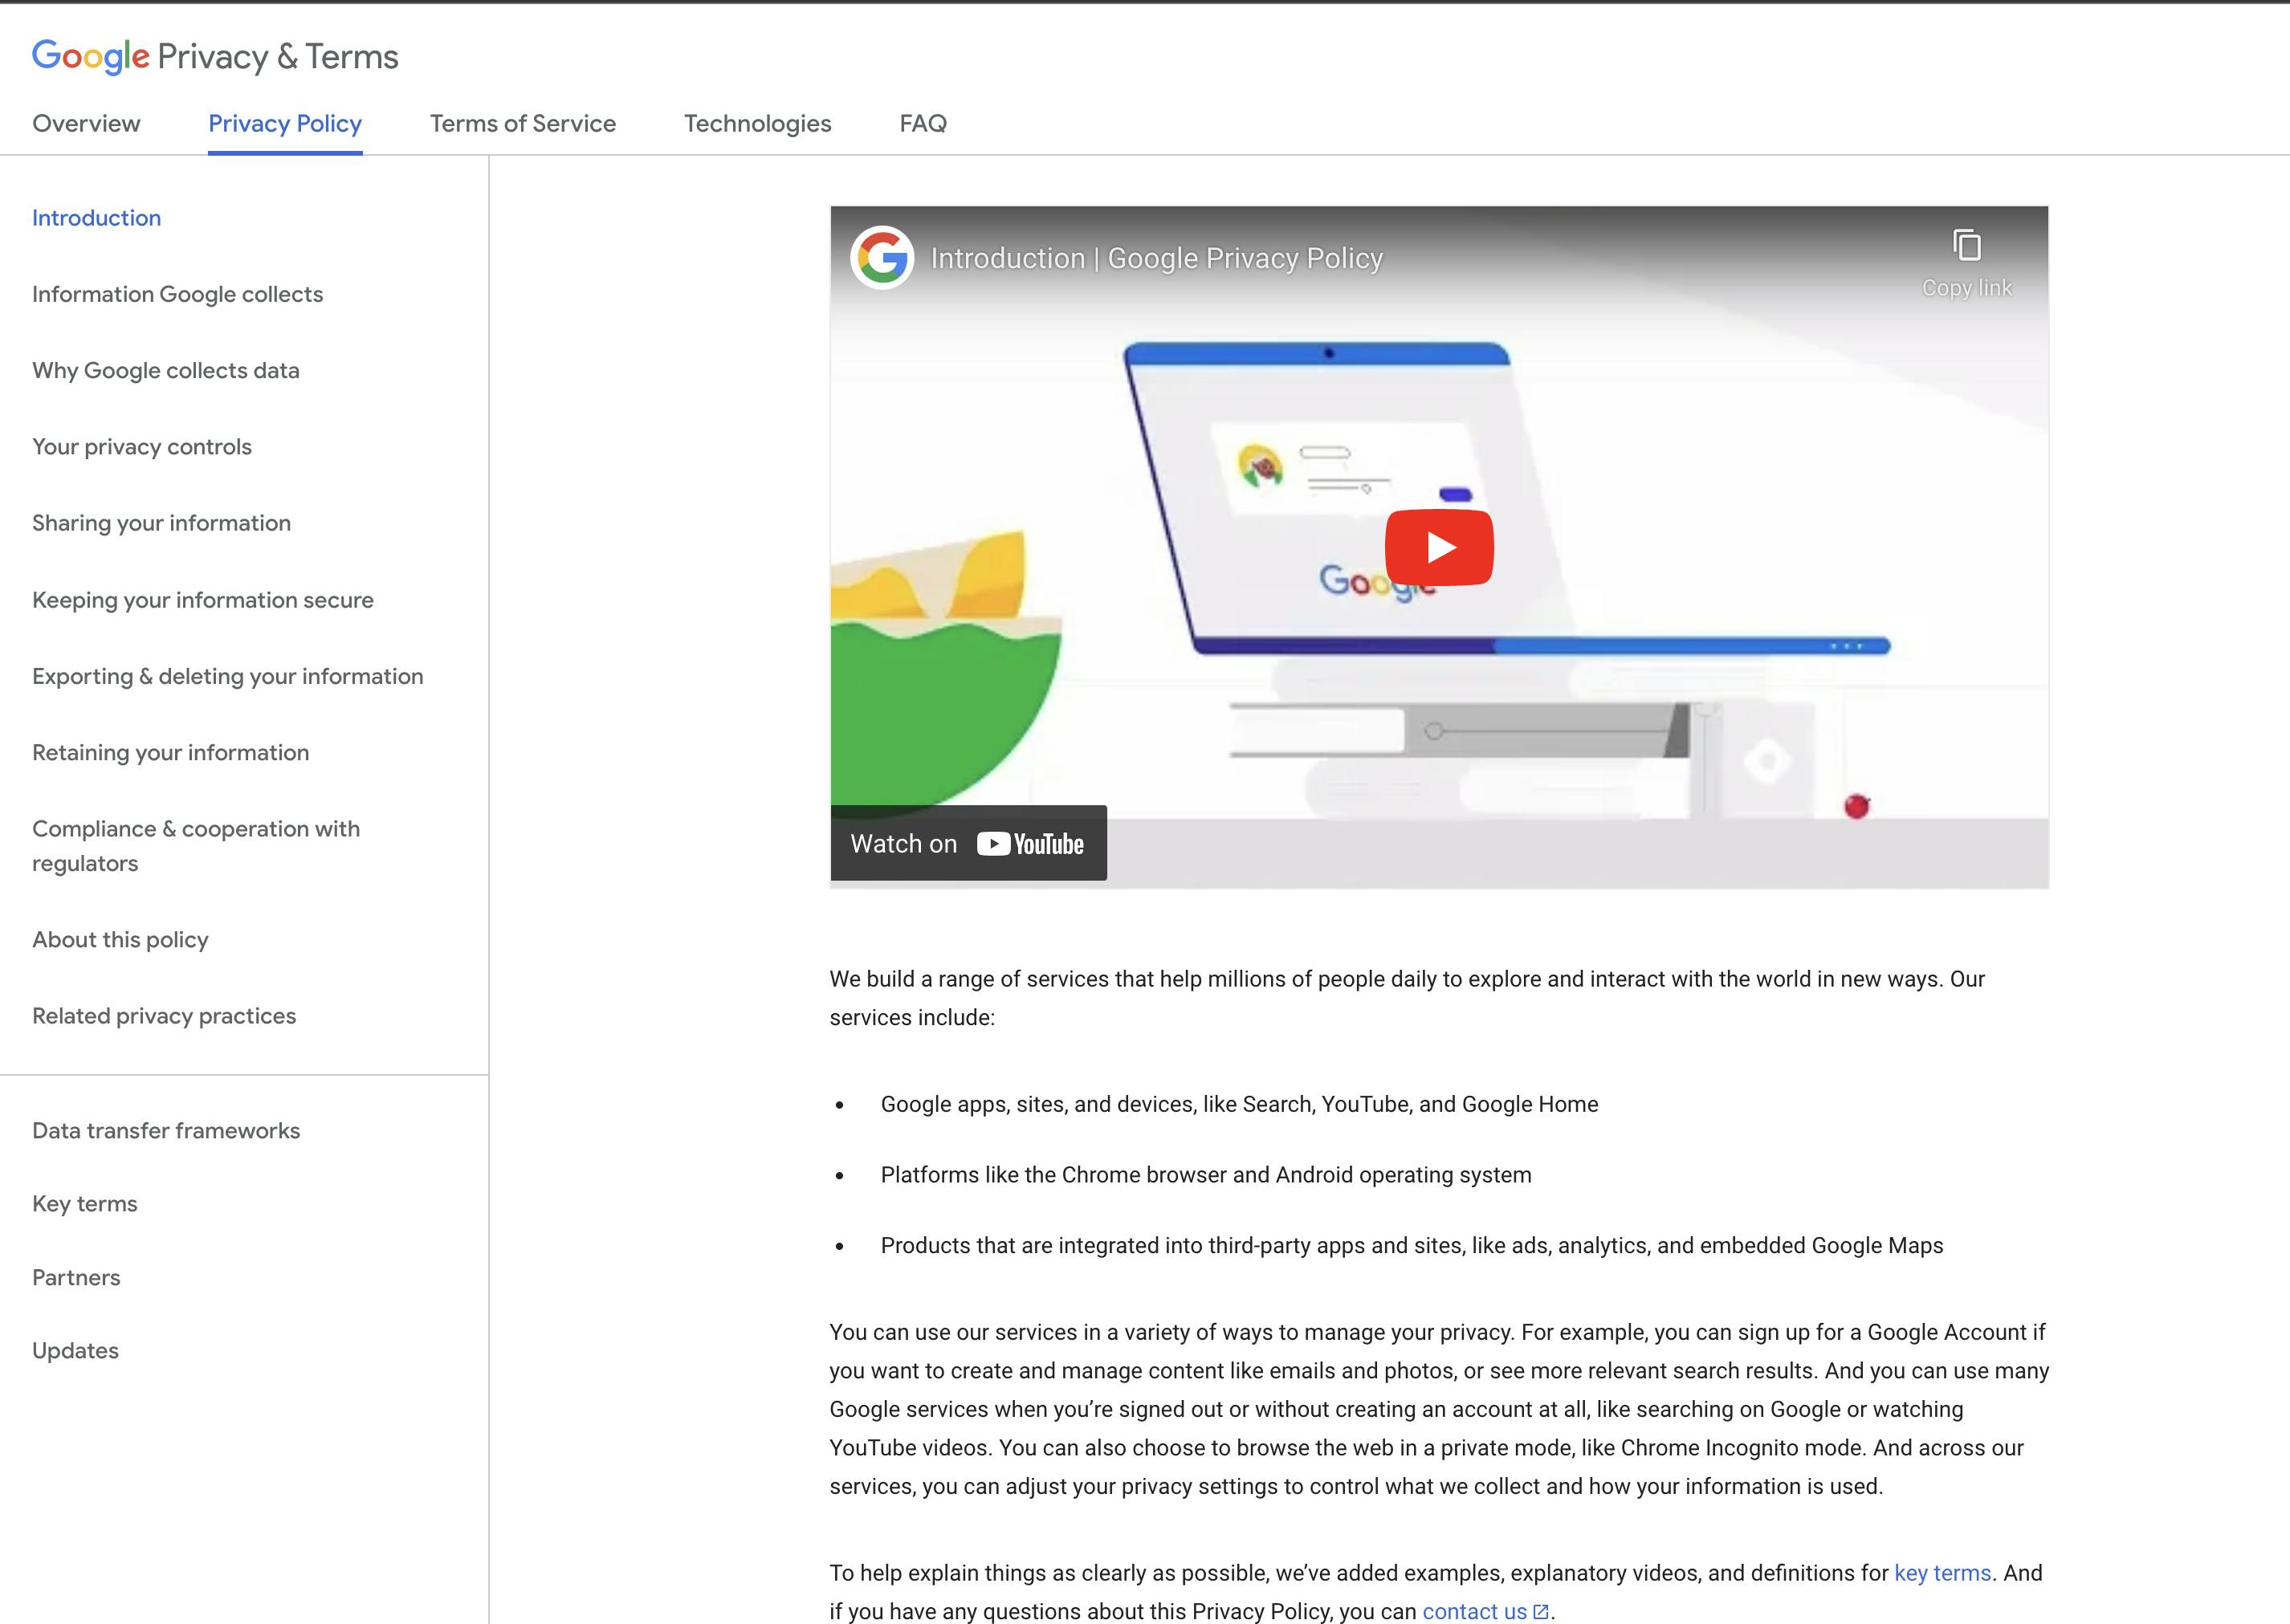 Google Privacy Policy example with video explaining what a privacy policy is